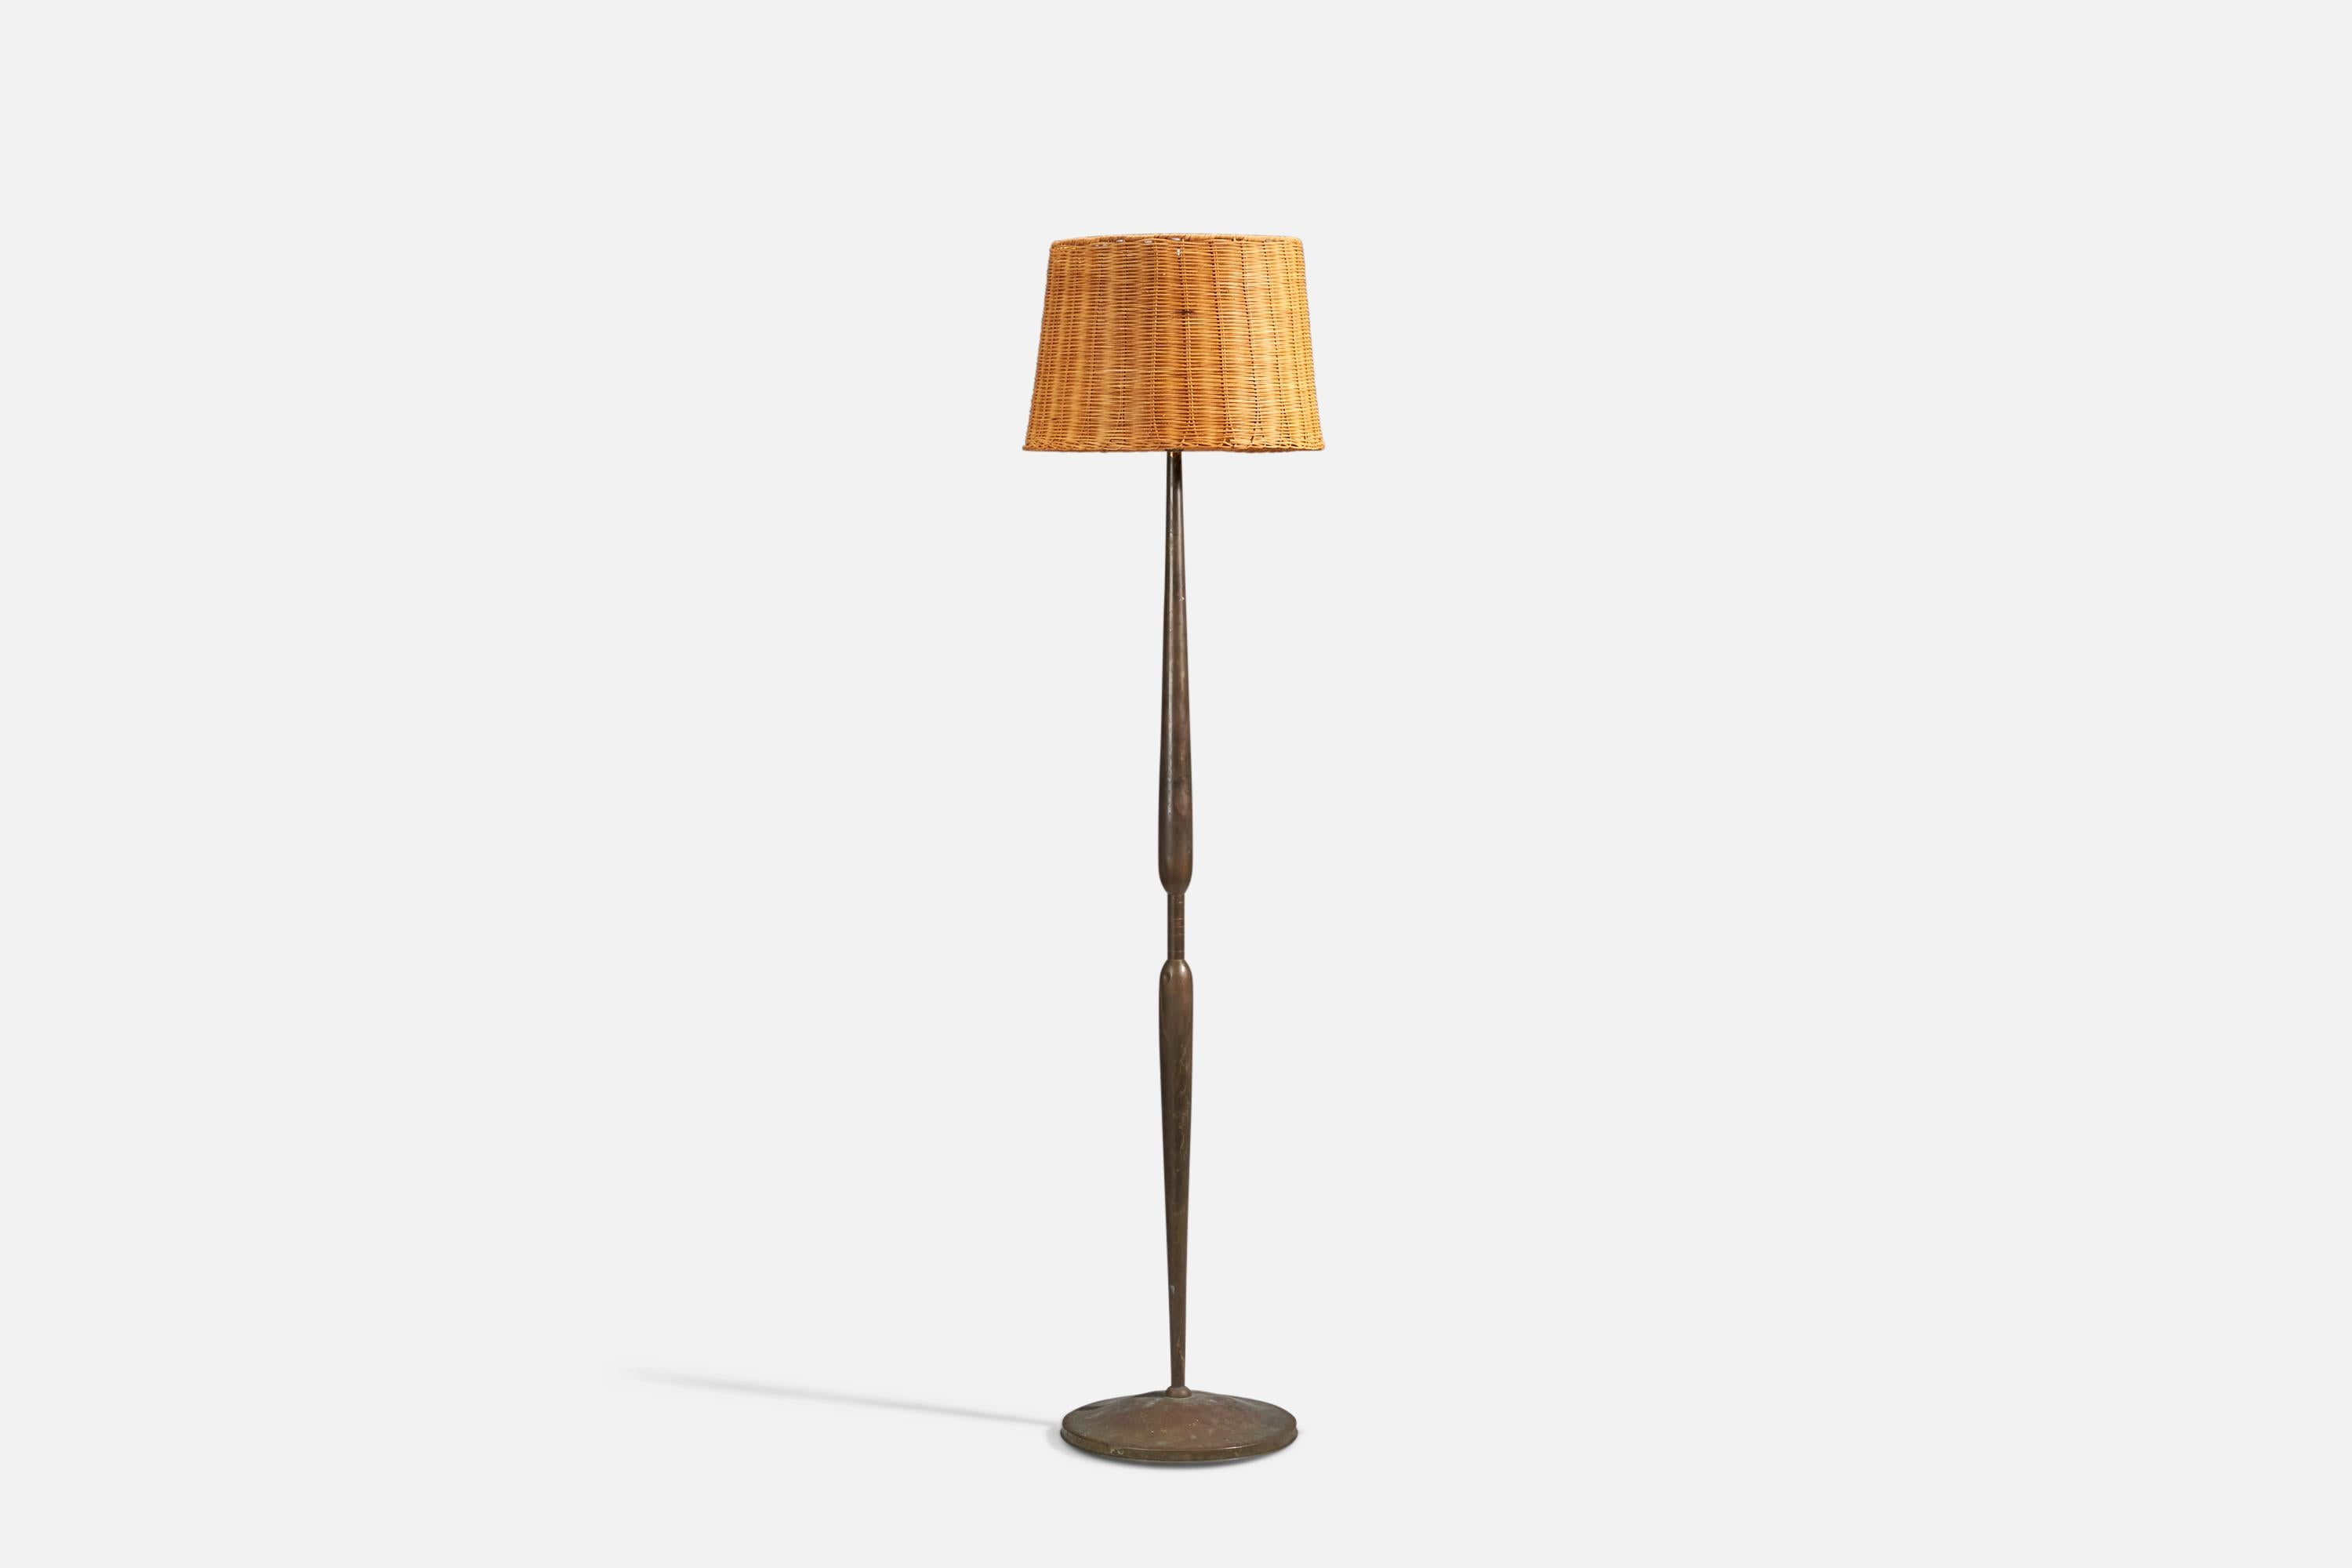 A brass, rattan, fabric floor lamp designed and produced in Italy, 1940s.

Dimensions stated are of Floor Lamp with Lampshade. 

Socket takes standard E-26 medium base bulb.

There is no maximum wattage stated on the fixture.